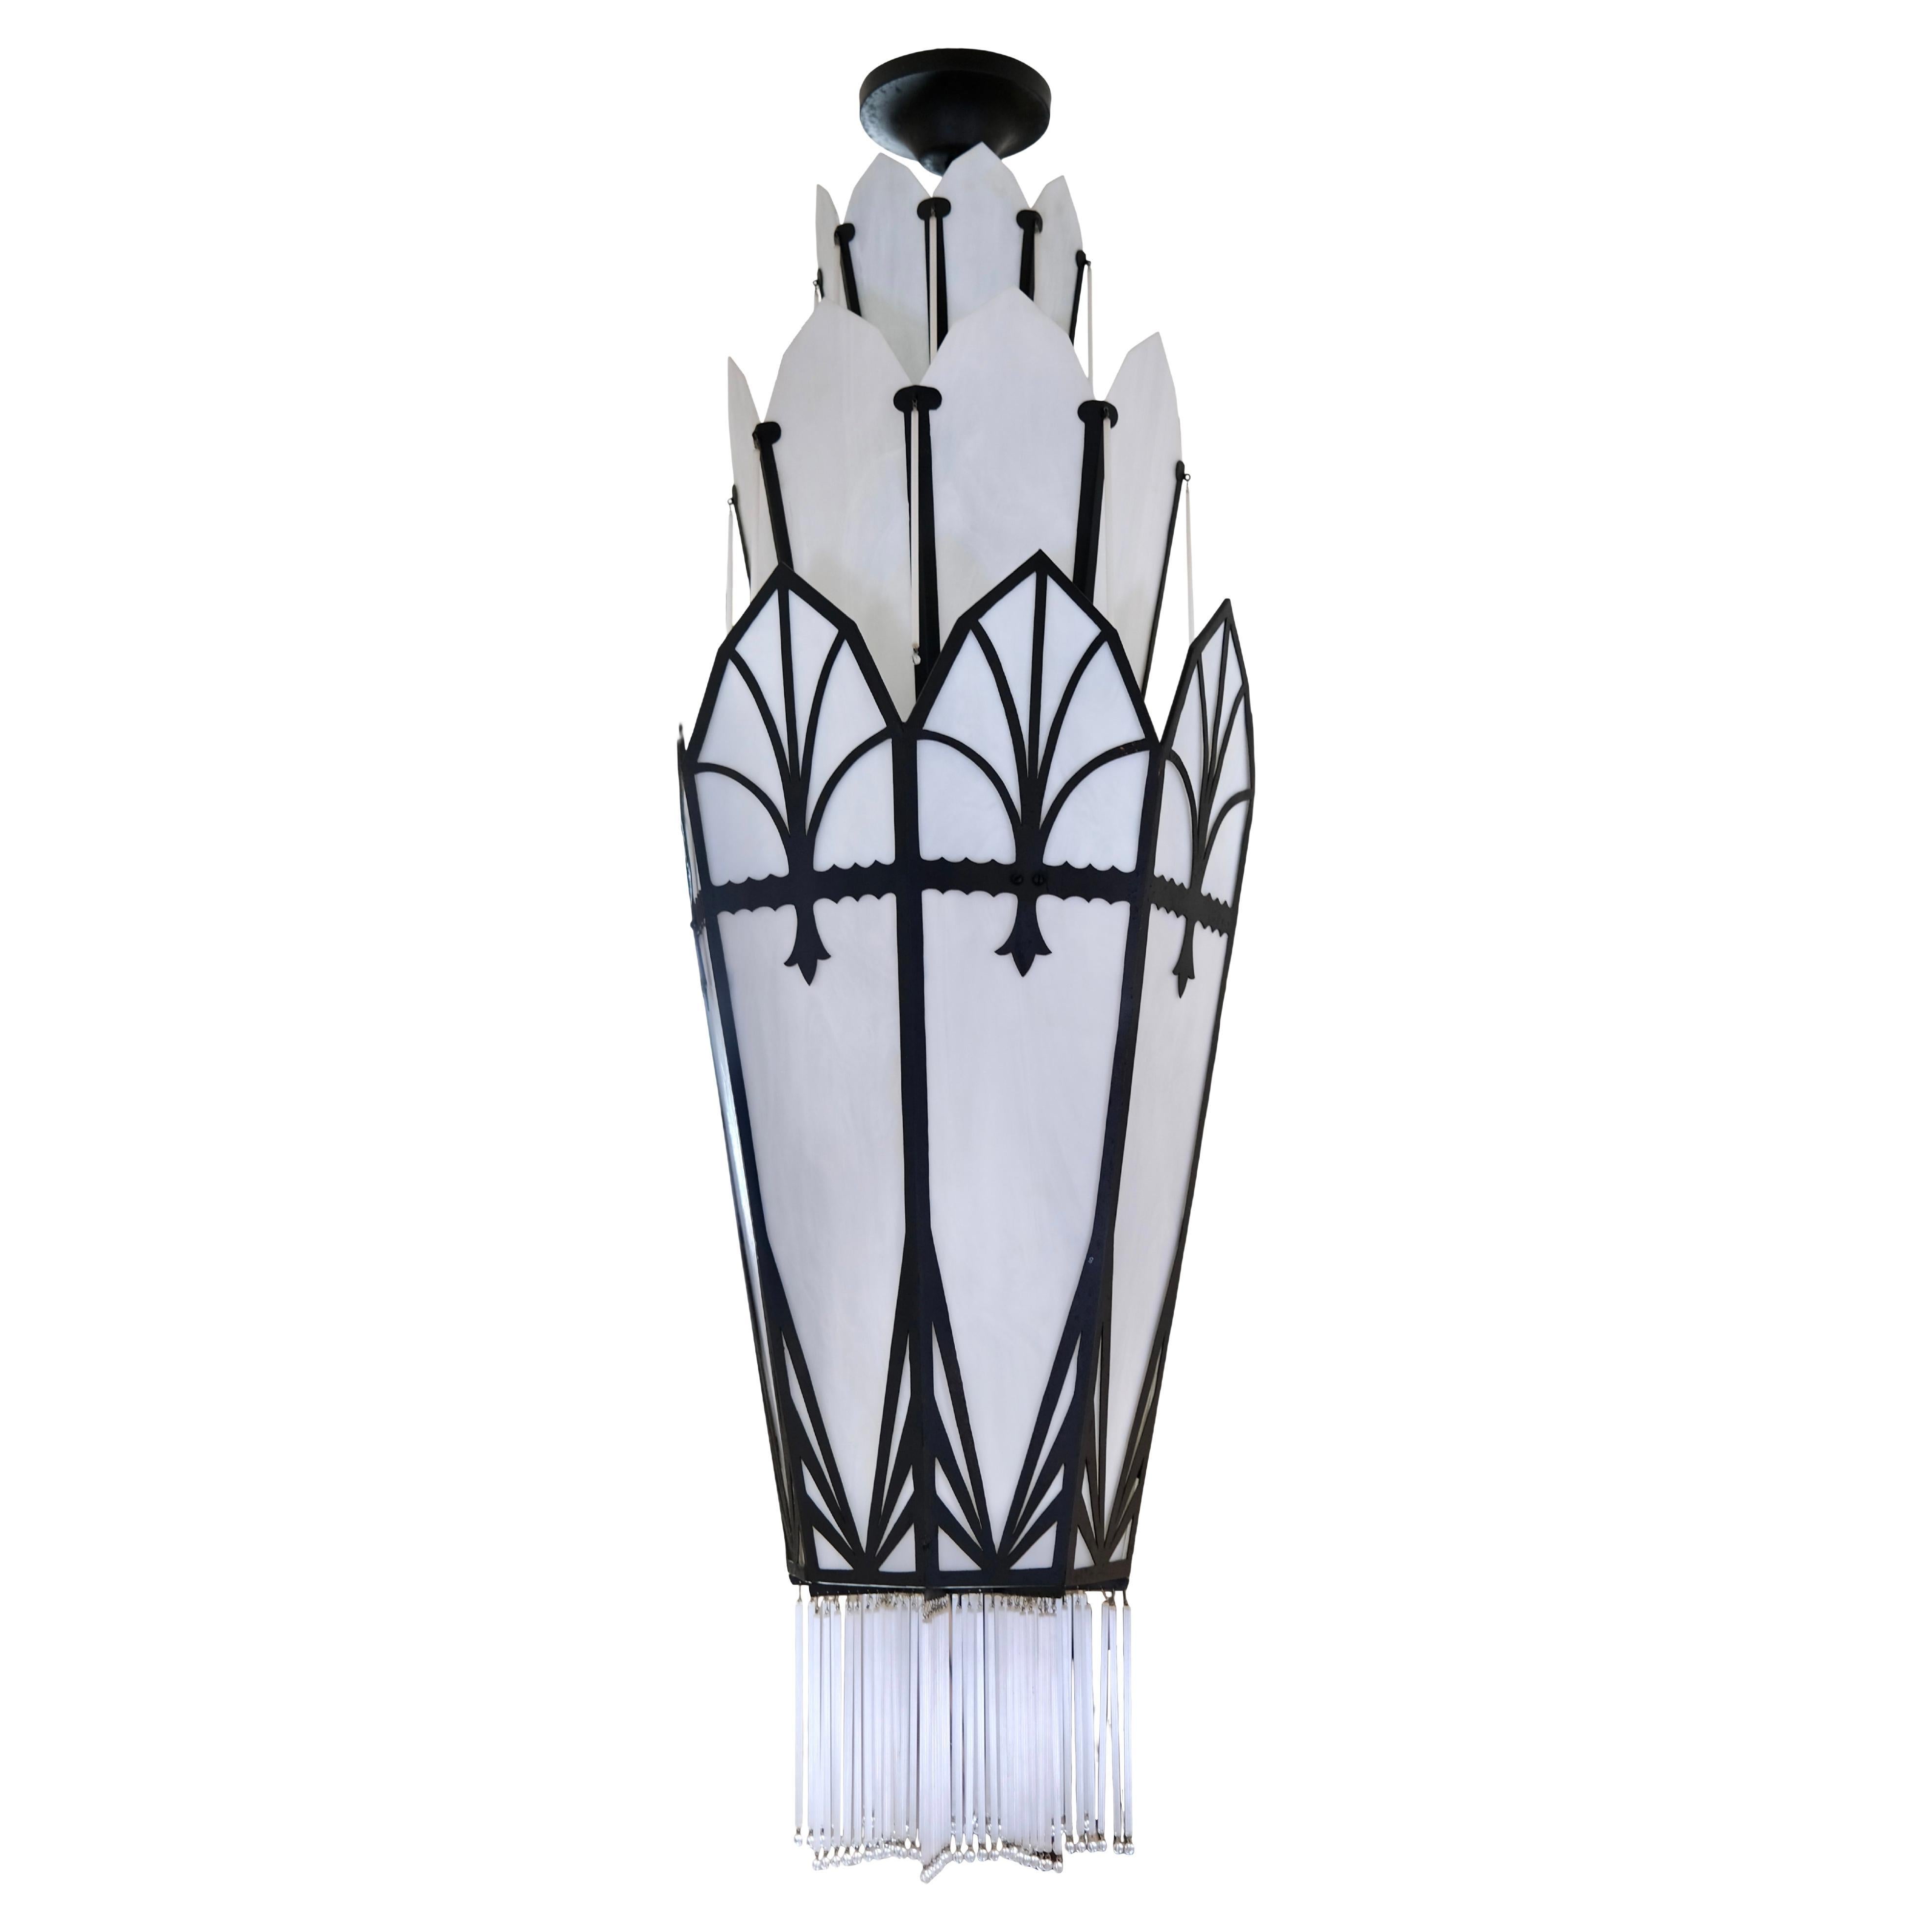 Long Octagonal Art Deco Style Chandelier with Glass and Black Metal Mount